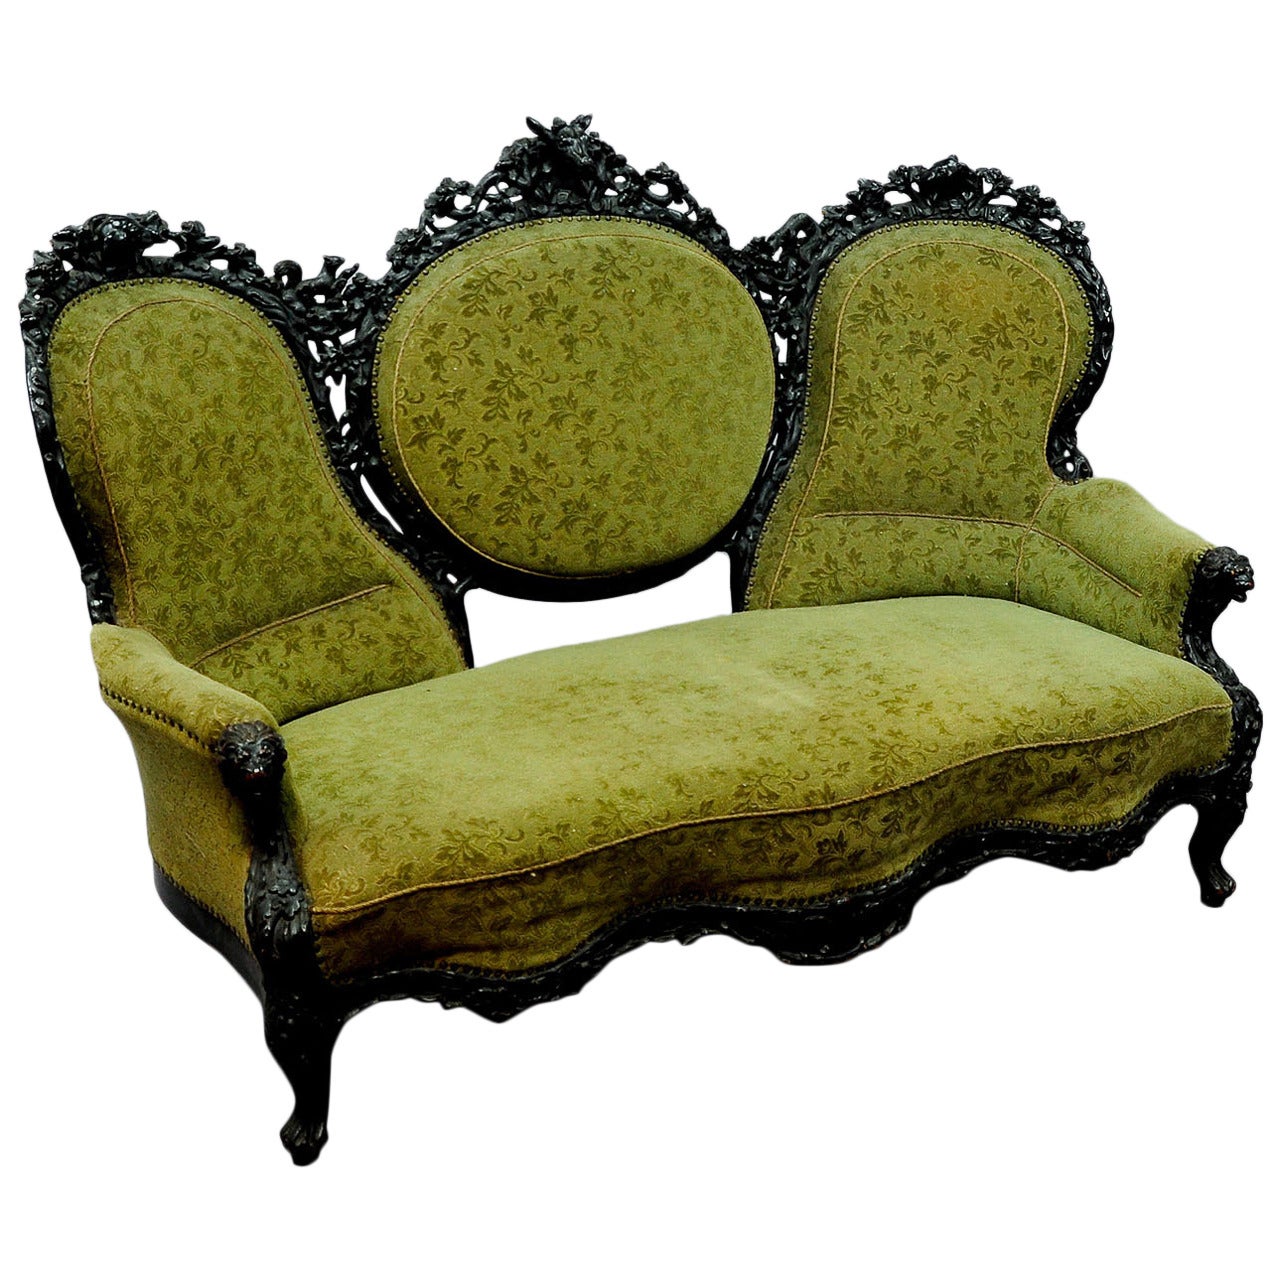 Black Forest Three-Seat Settee with Fine Carvings